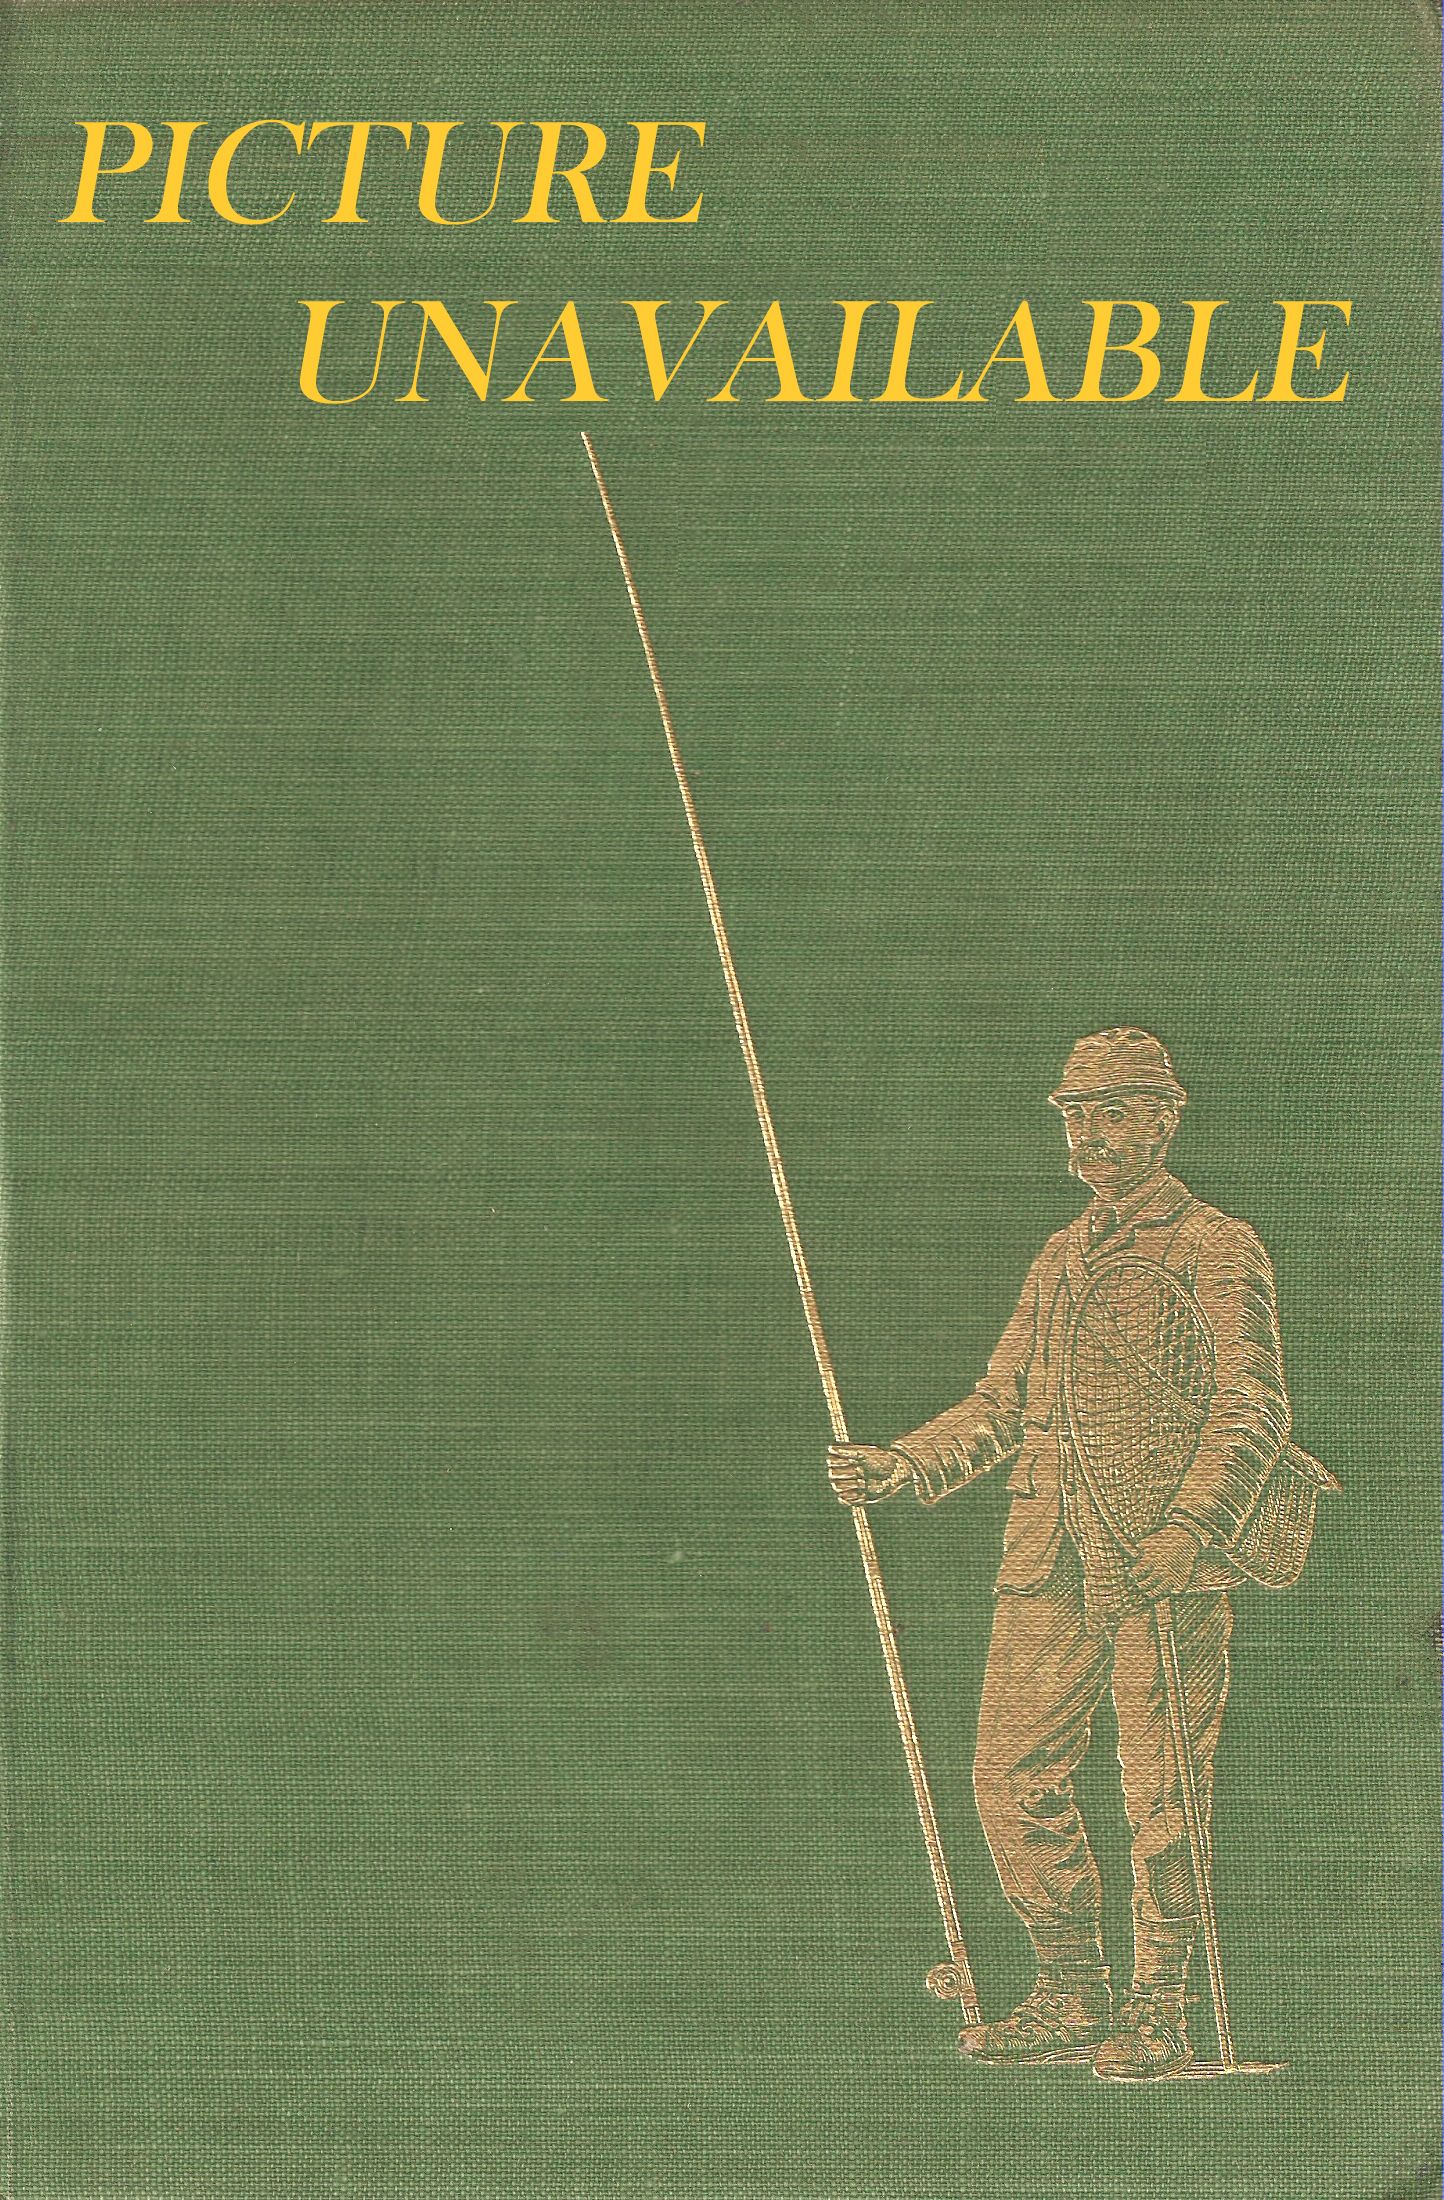 THE PASSIONATE ANGLER. By Maurice Wiggin. Country Book Club edition.